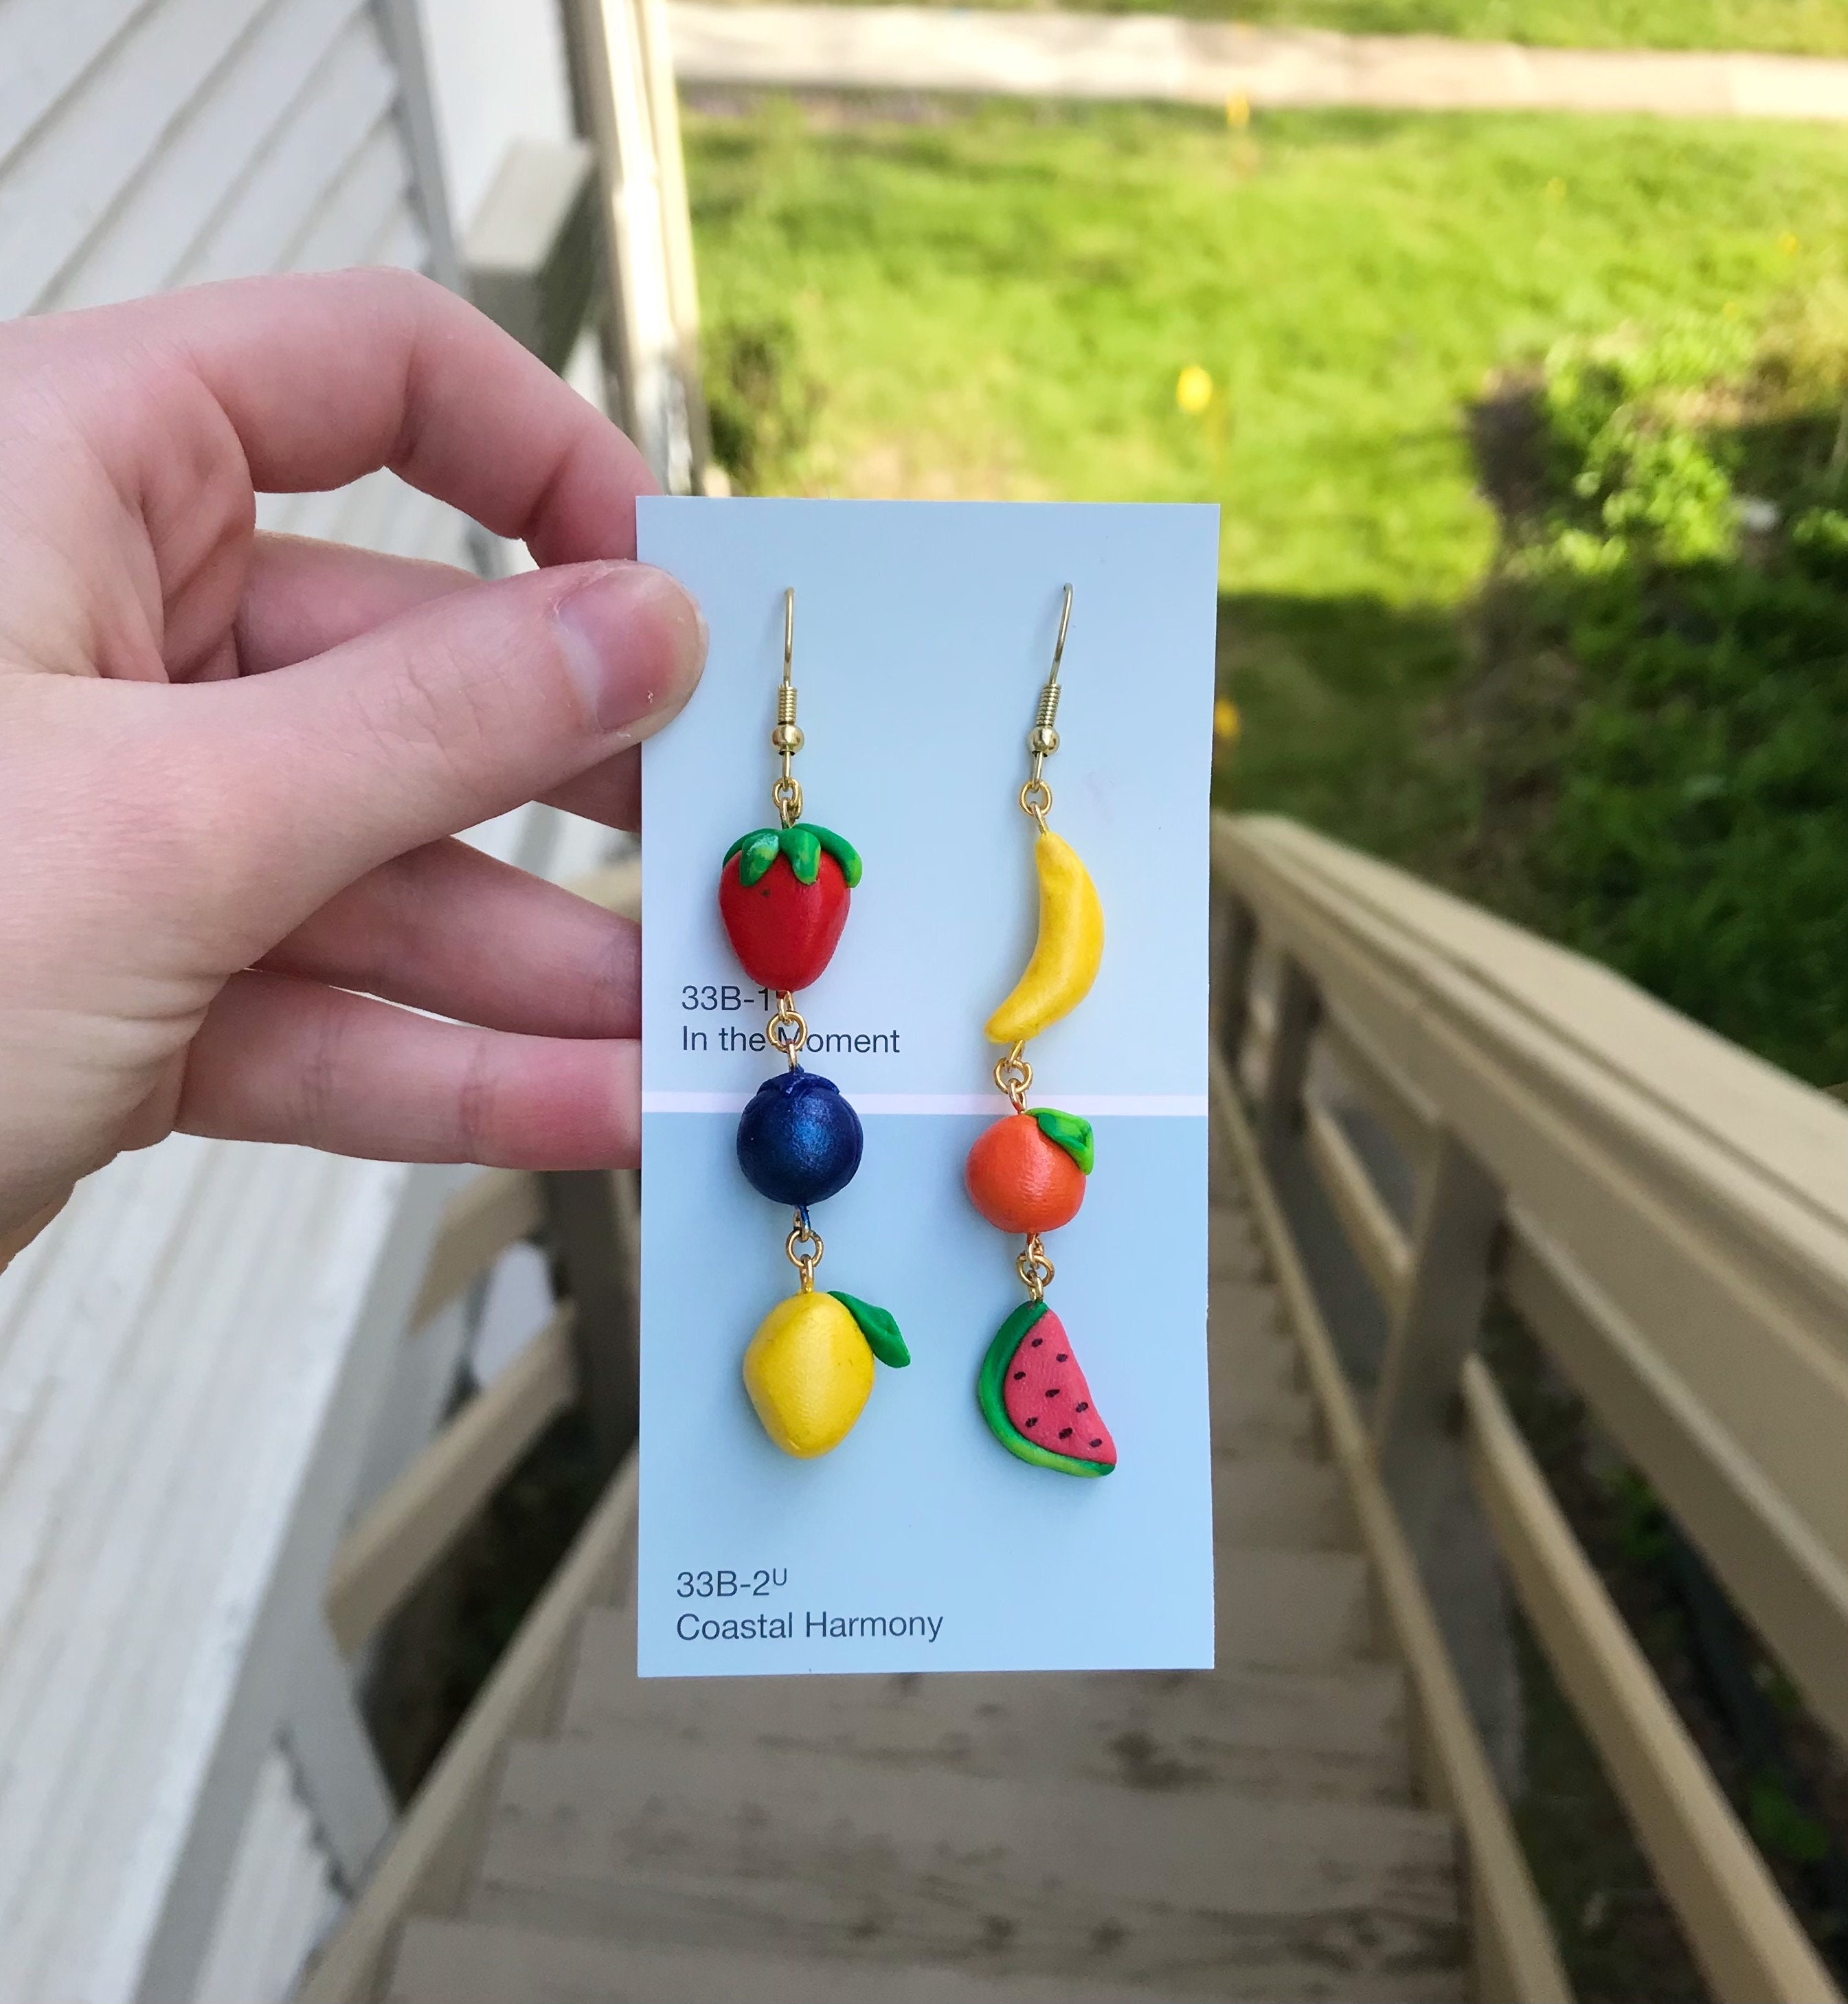 Strawberry Cow Squishmallow Earrings